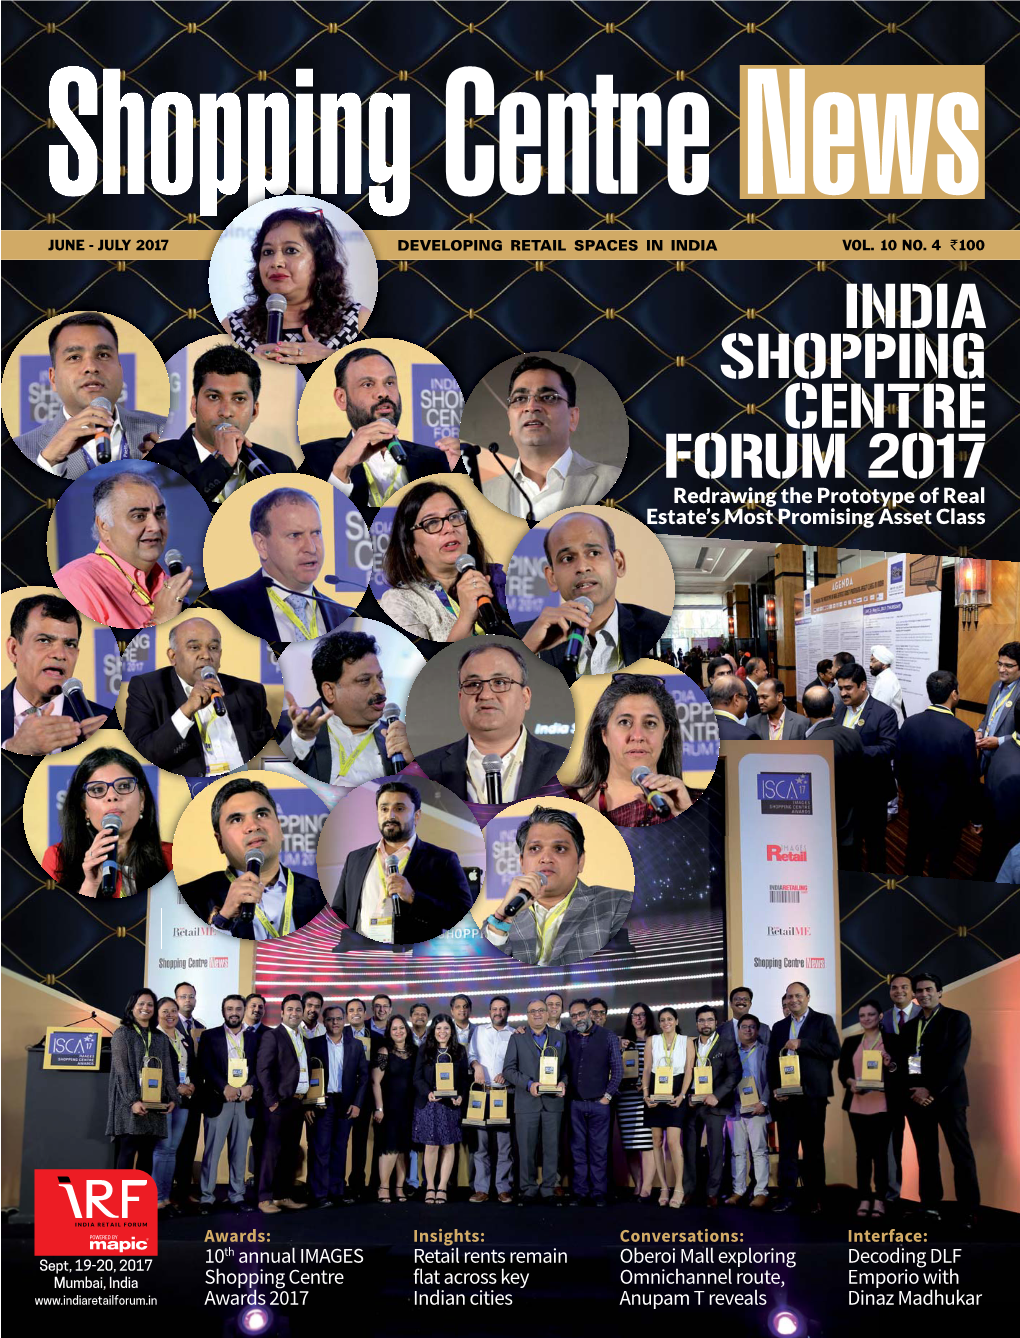 INDIA SHOPPING CENTRE FORUM 2017 Redrawing the Prototype of Real Estate’S Most Promising Asset Class